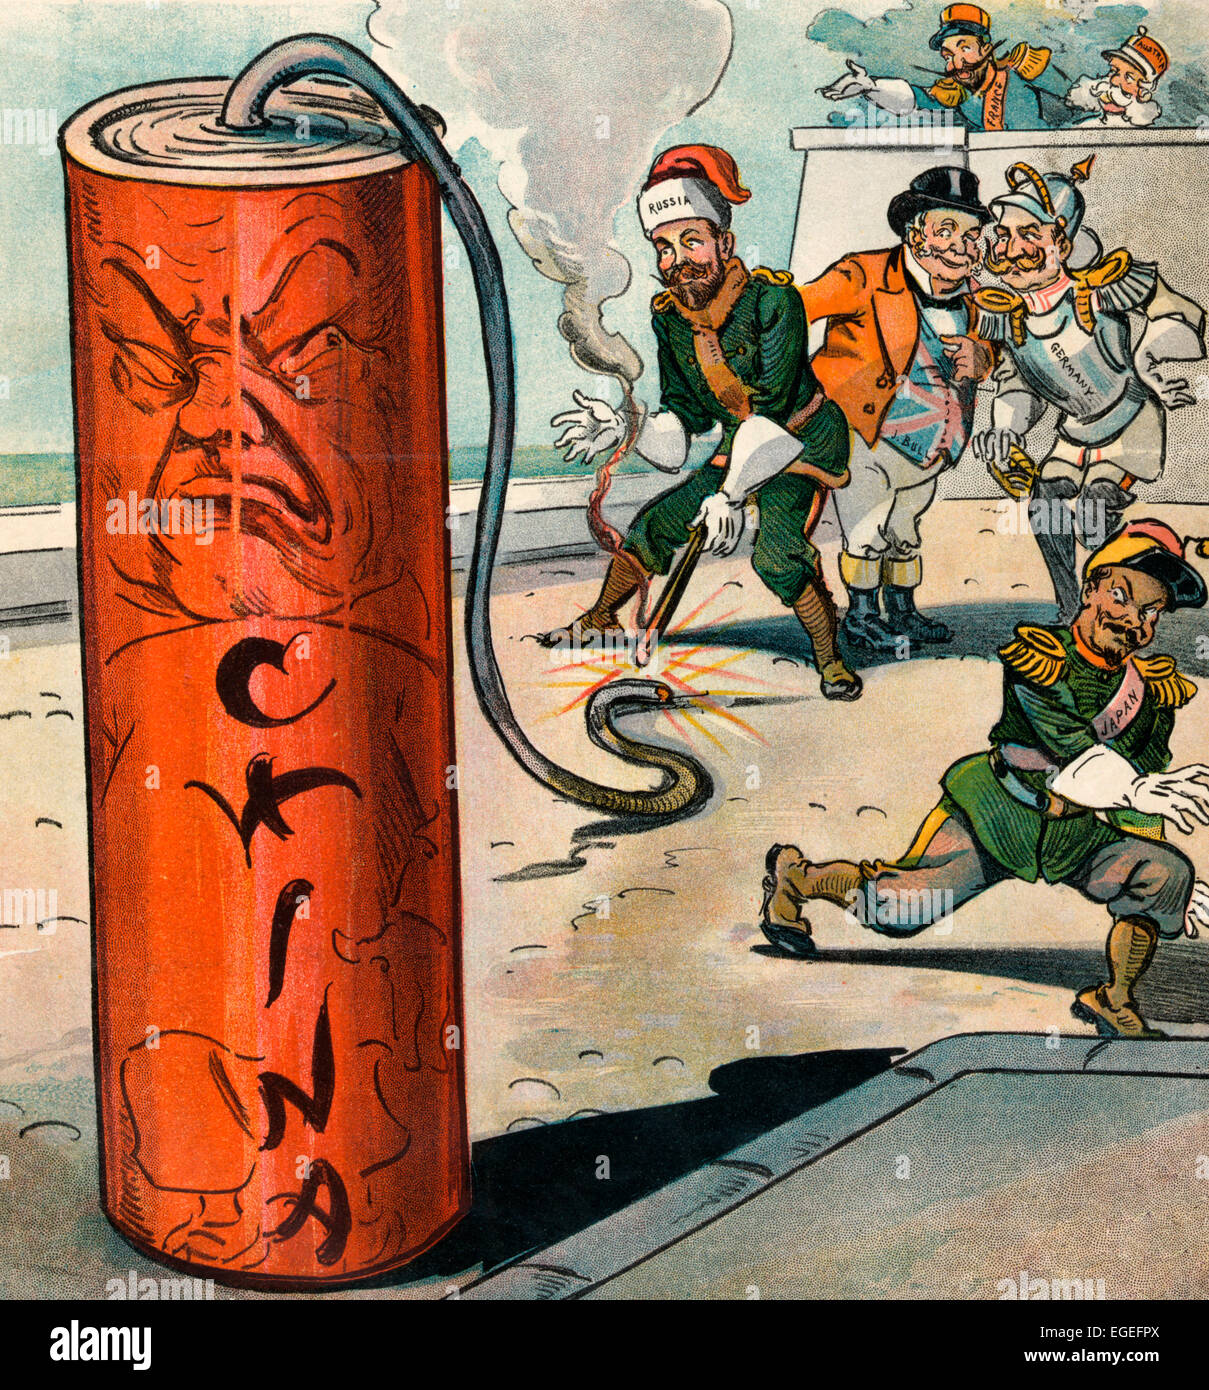 A Dangerous Firecracker - Illustration shows the rulers of Germany, France, Austria, Japan, and John Bull, representing England, watching as the ruler of Russia lights the fuse of a large firecracker labeled 'China.'  Political Cartoon 1900 Stock Photo